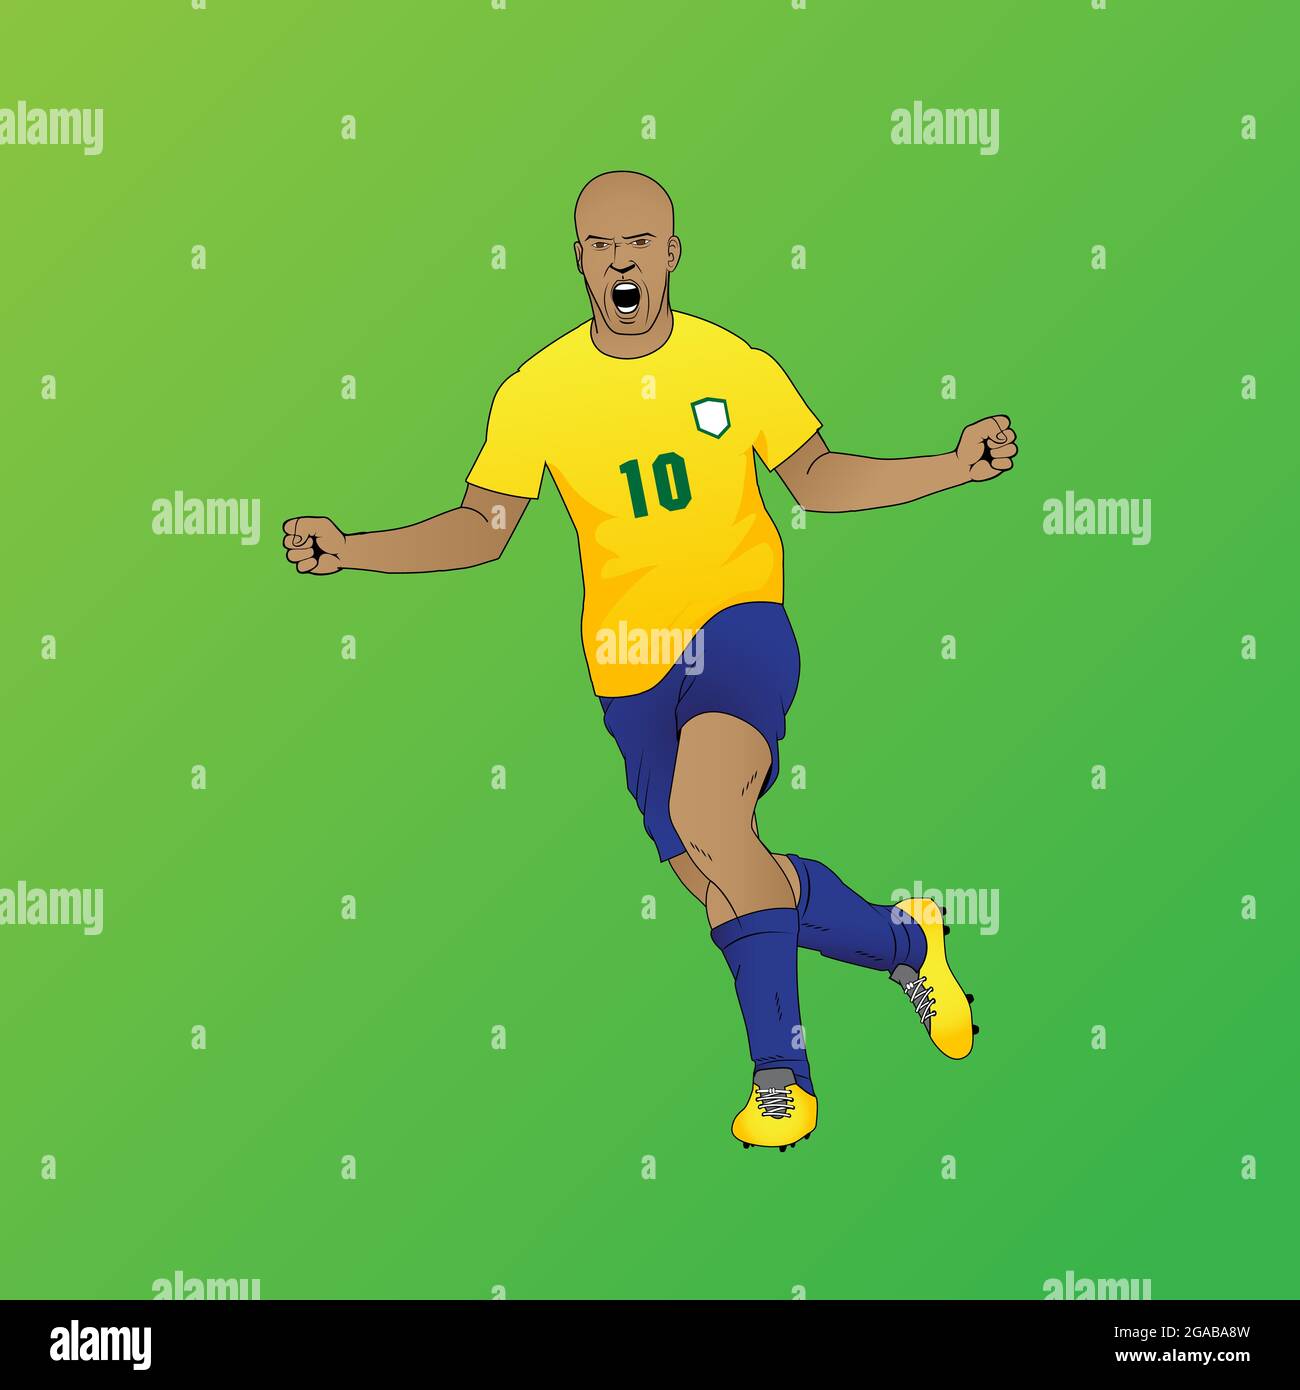 Football player version 3 goal score vector illustration for banner, poster, design element or any other purpose Stock Vector